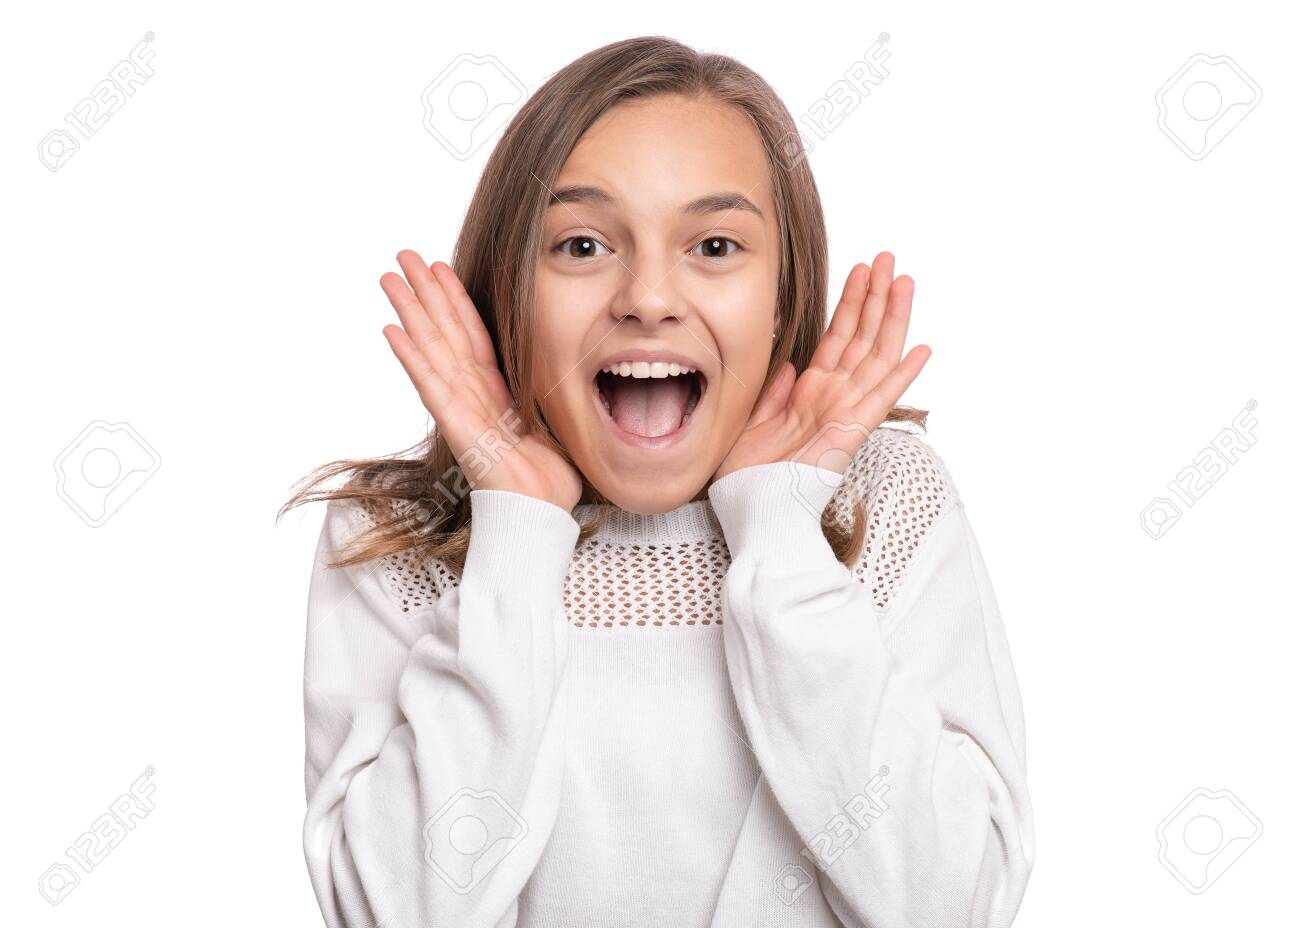 Surprised Happy Young Teen Girl Isolated On White Background